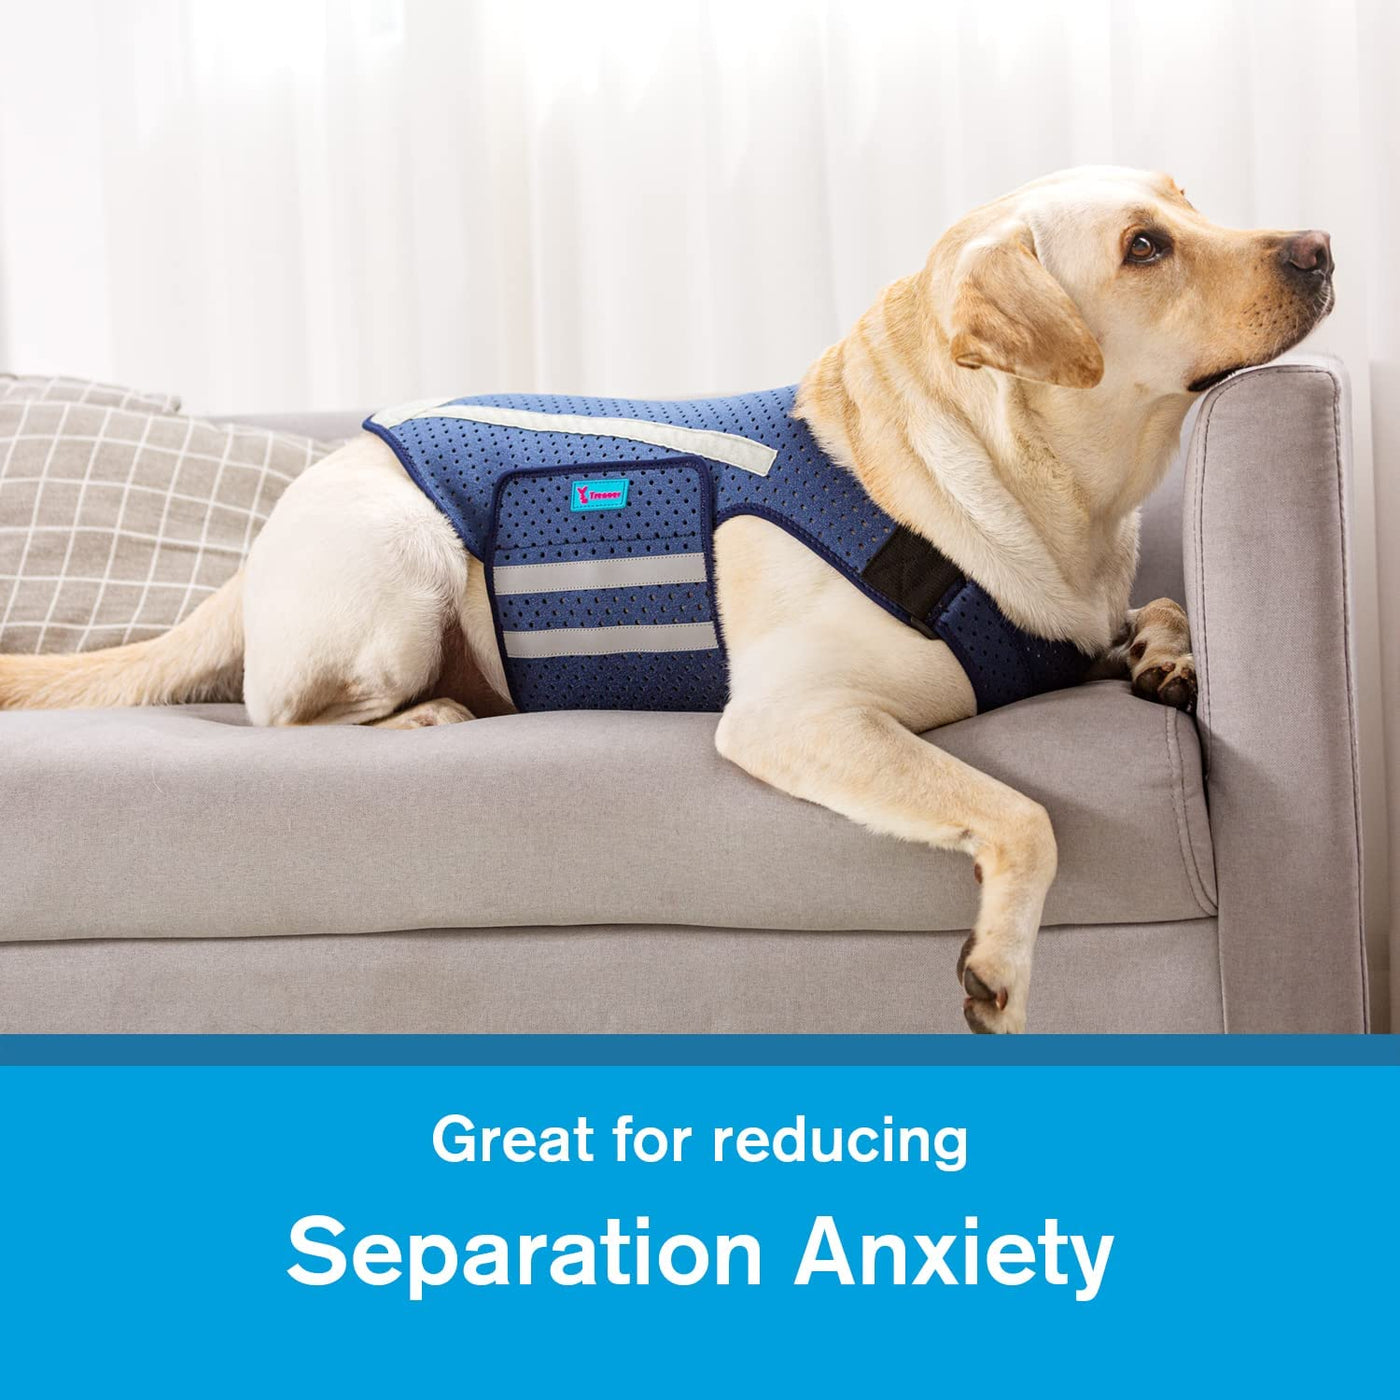 Dog Anxiety Vest, Comfort Dog Anxiety Relief Jacket, Breathable Shirts for Dogs, Soft Dog Anxiety Coat Vest, Puppy Anxiety Warp Calming Thunder Shirt for Pet (M, Blue)